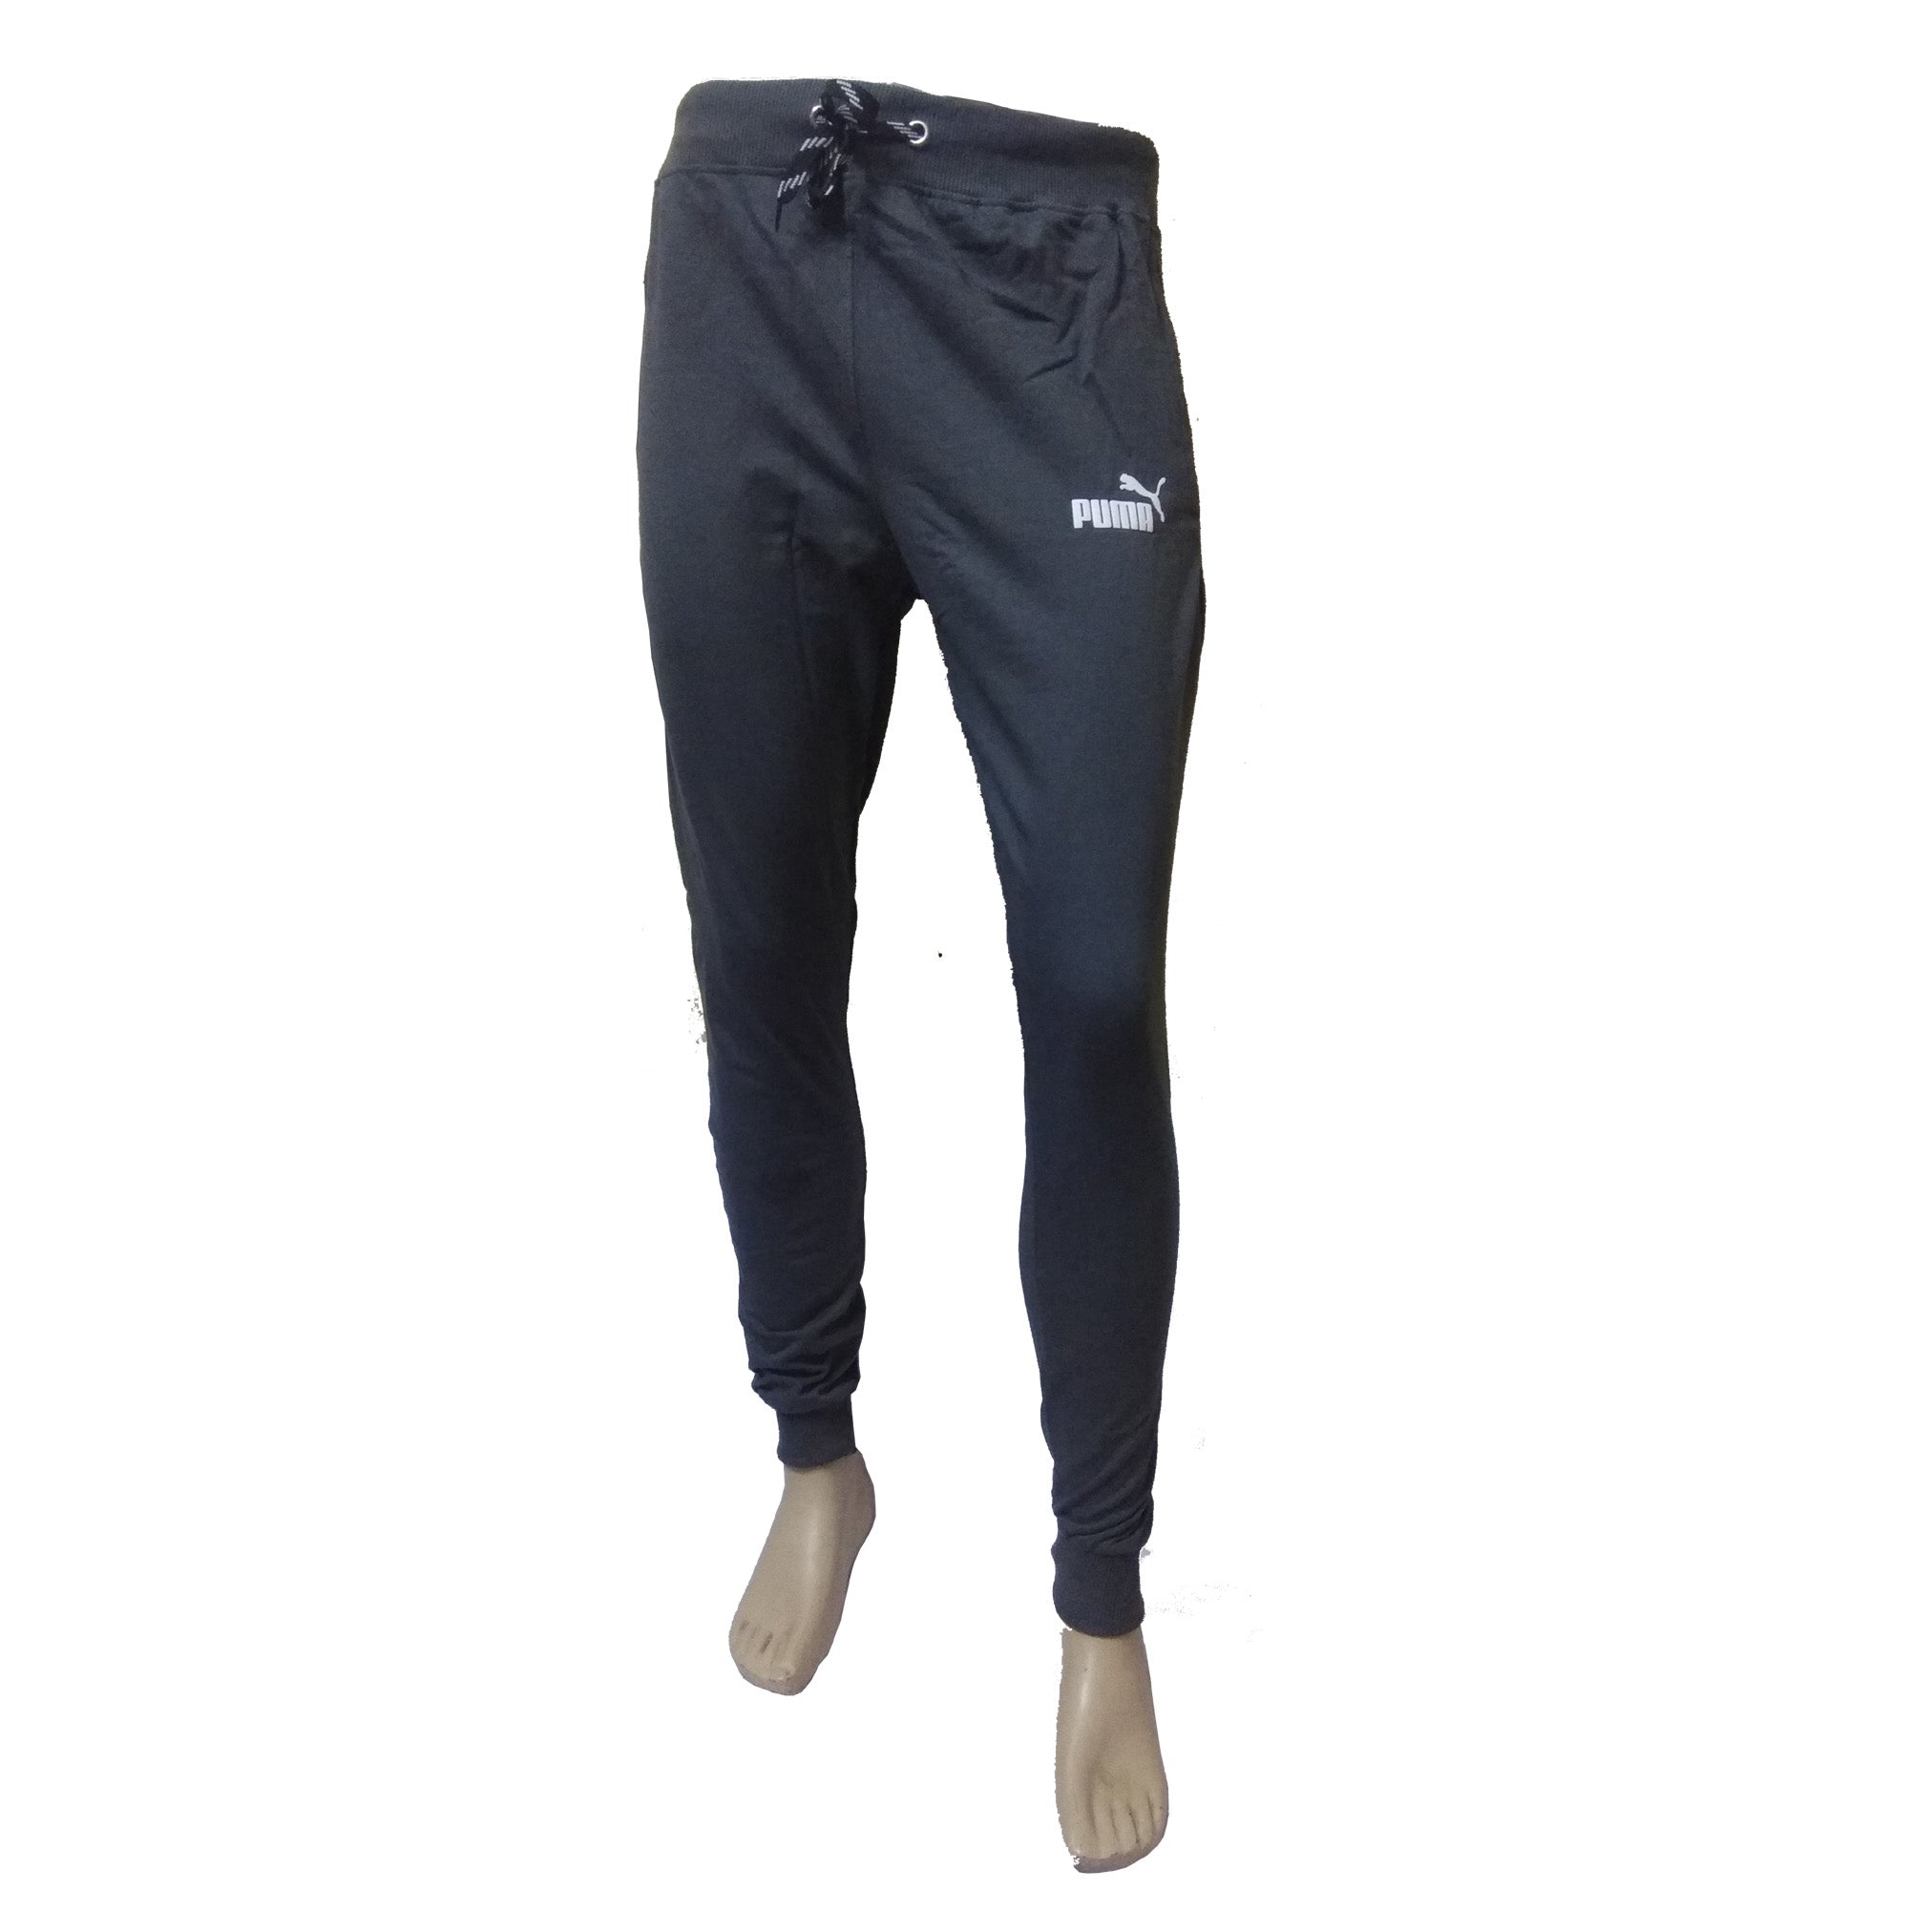 Alpha Industries Men's Joggers Fitted Cotton Logo Branded Sweat Pants in  Black | eBay